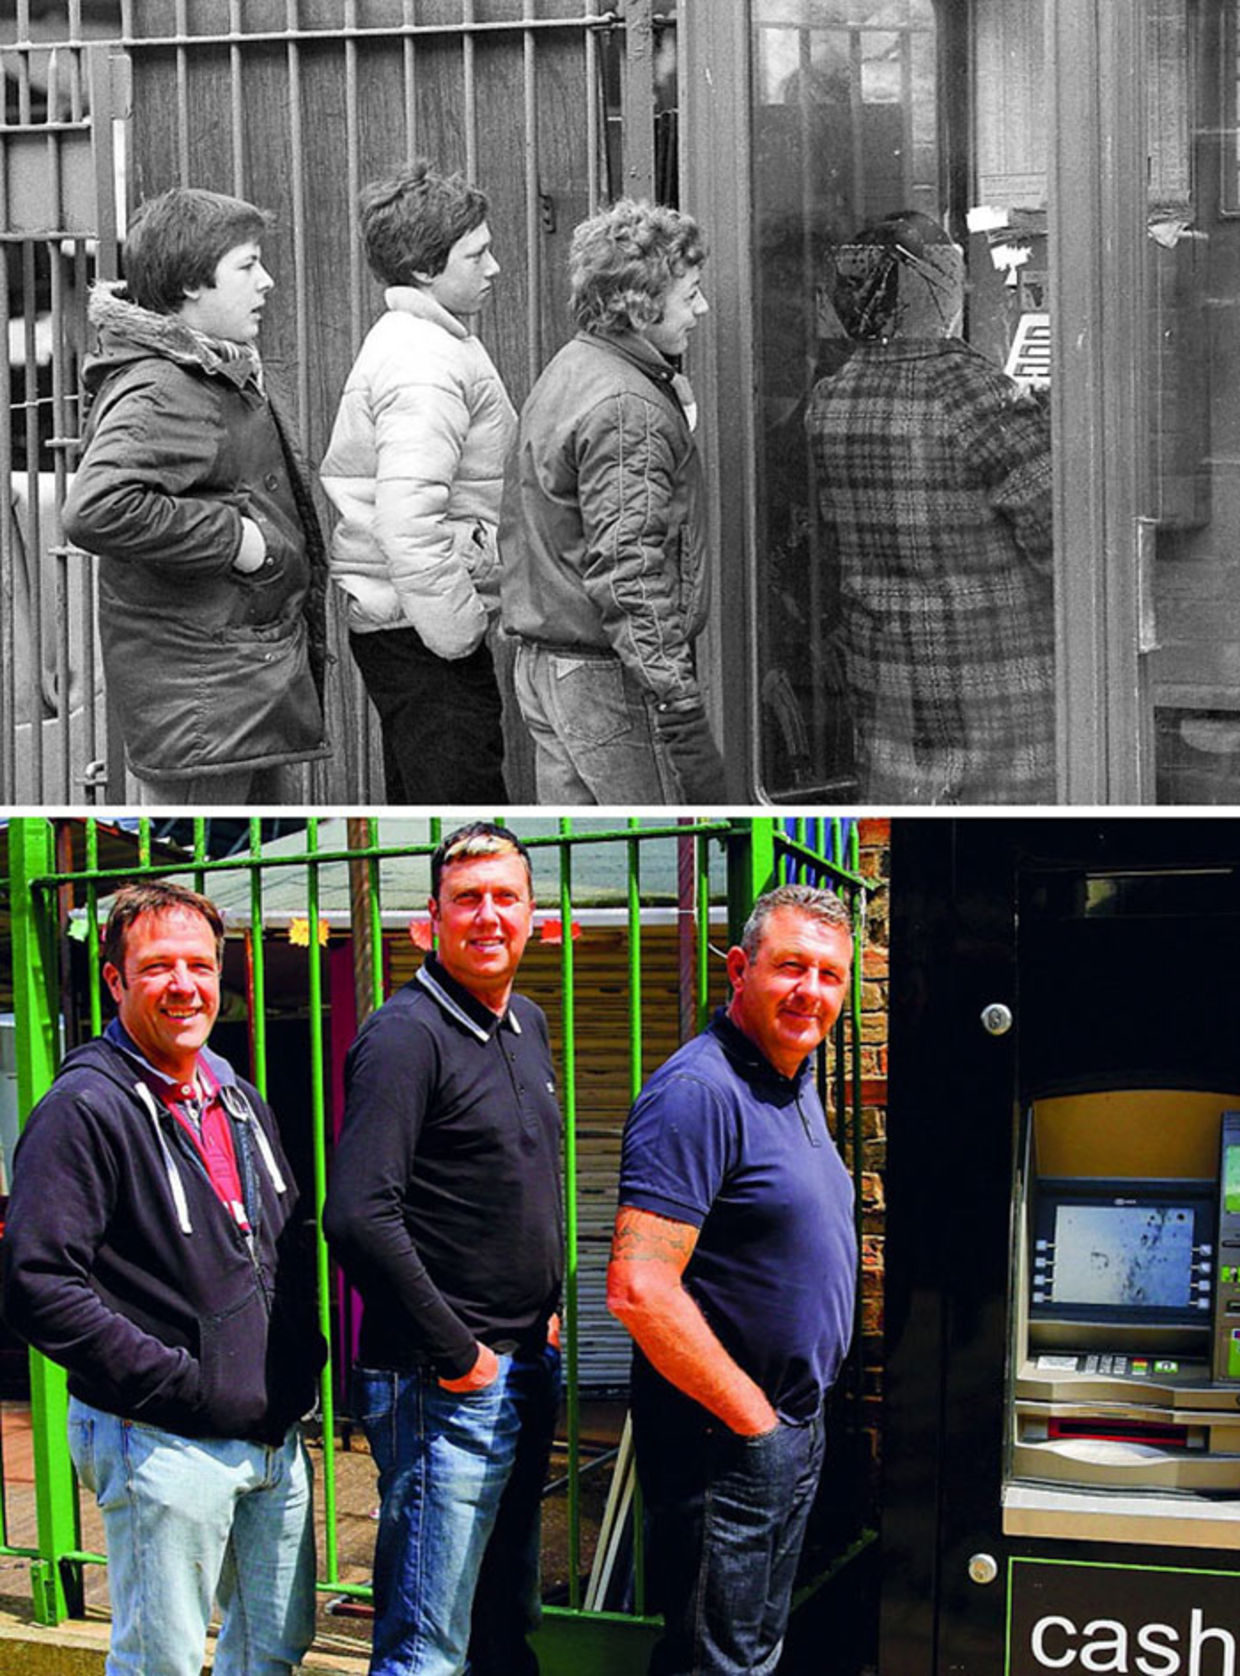 School friends John Morris, Paul Barnard and Andrew Pollard (l to r) were photgraphed queuing up to use the phone in Cattle Market Road. Until the second picture was taken, they hadn't seen each other for 32 years. (Chris Porsz)